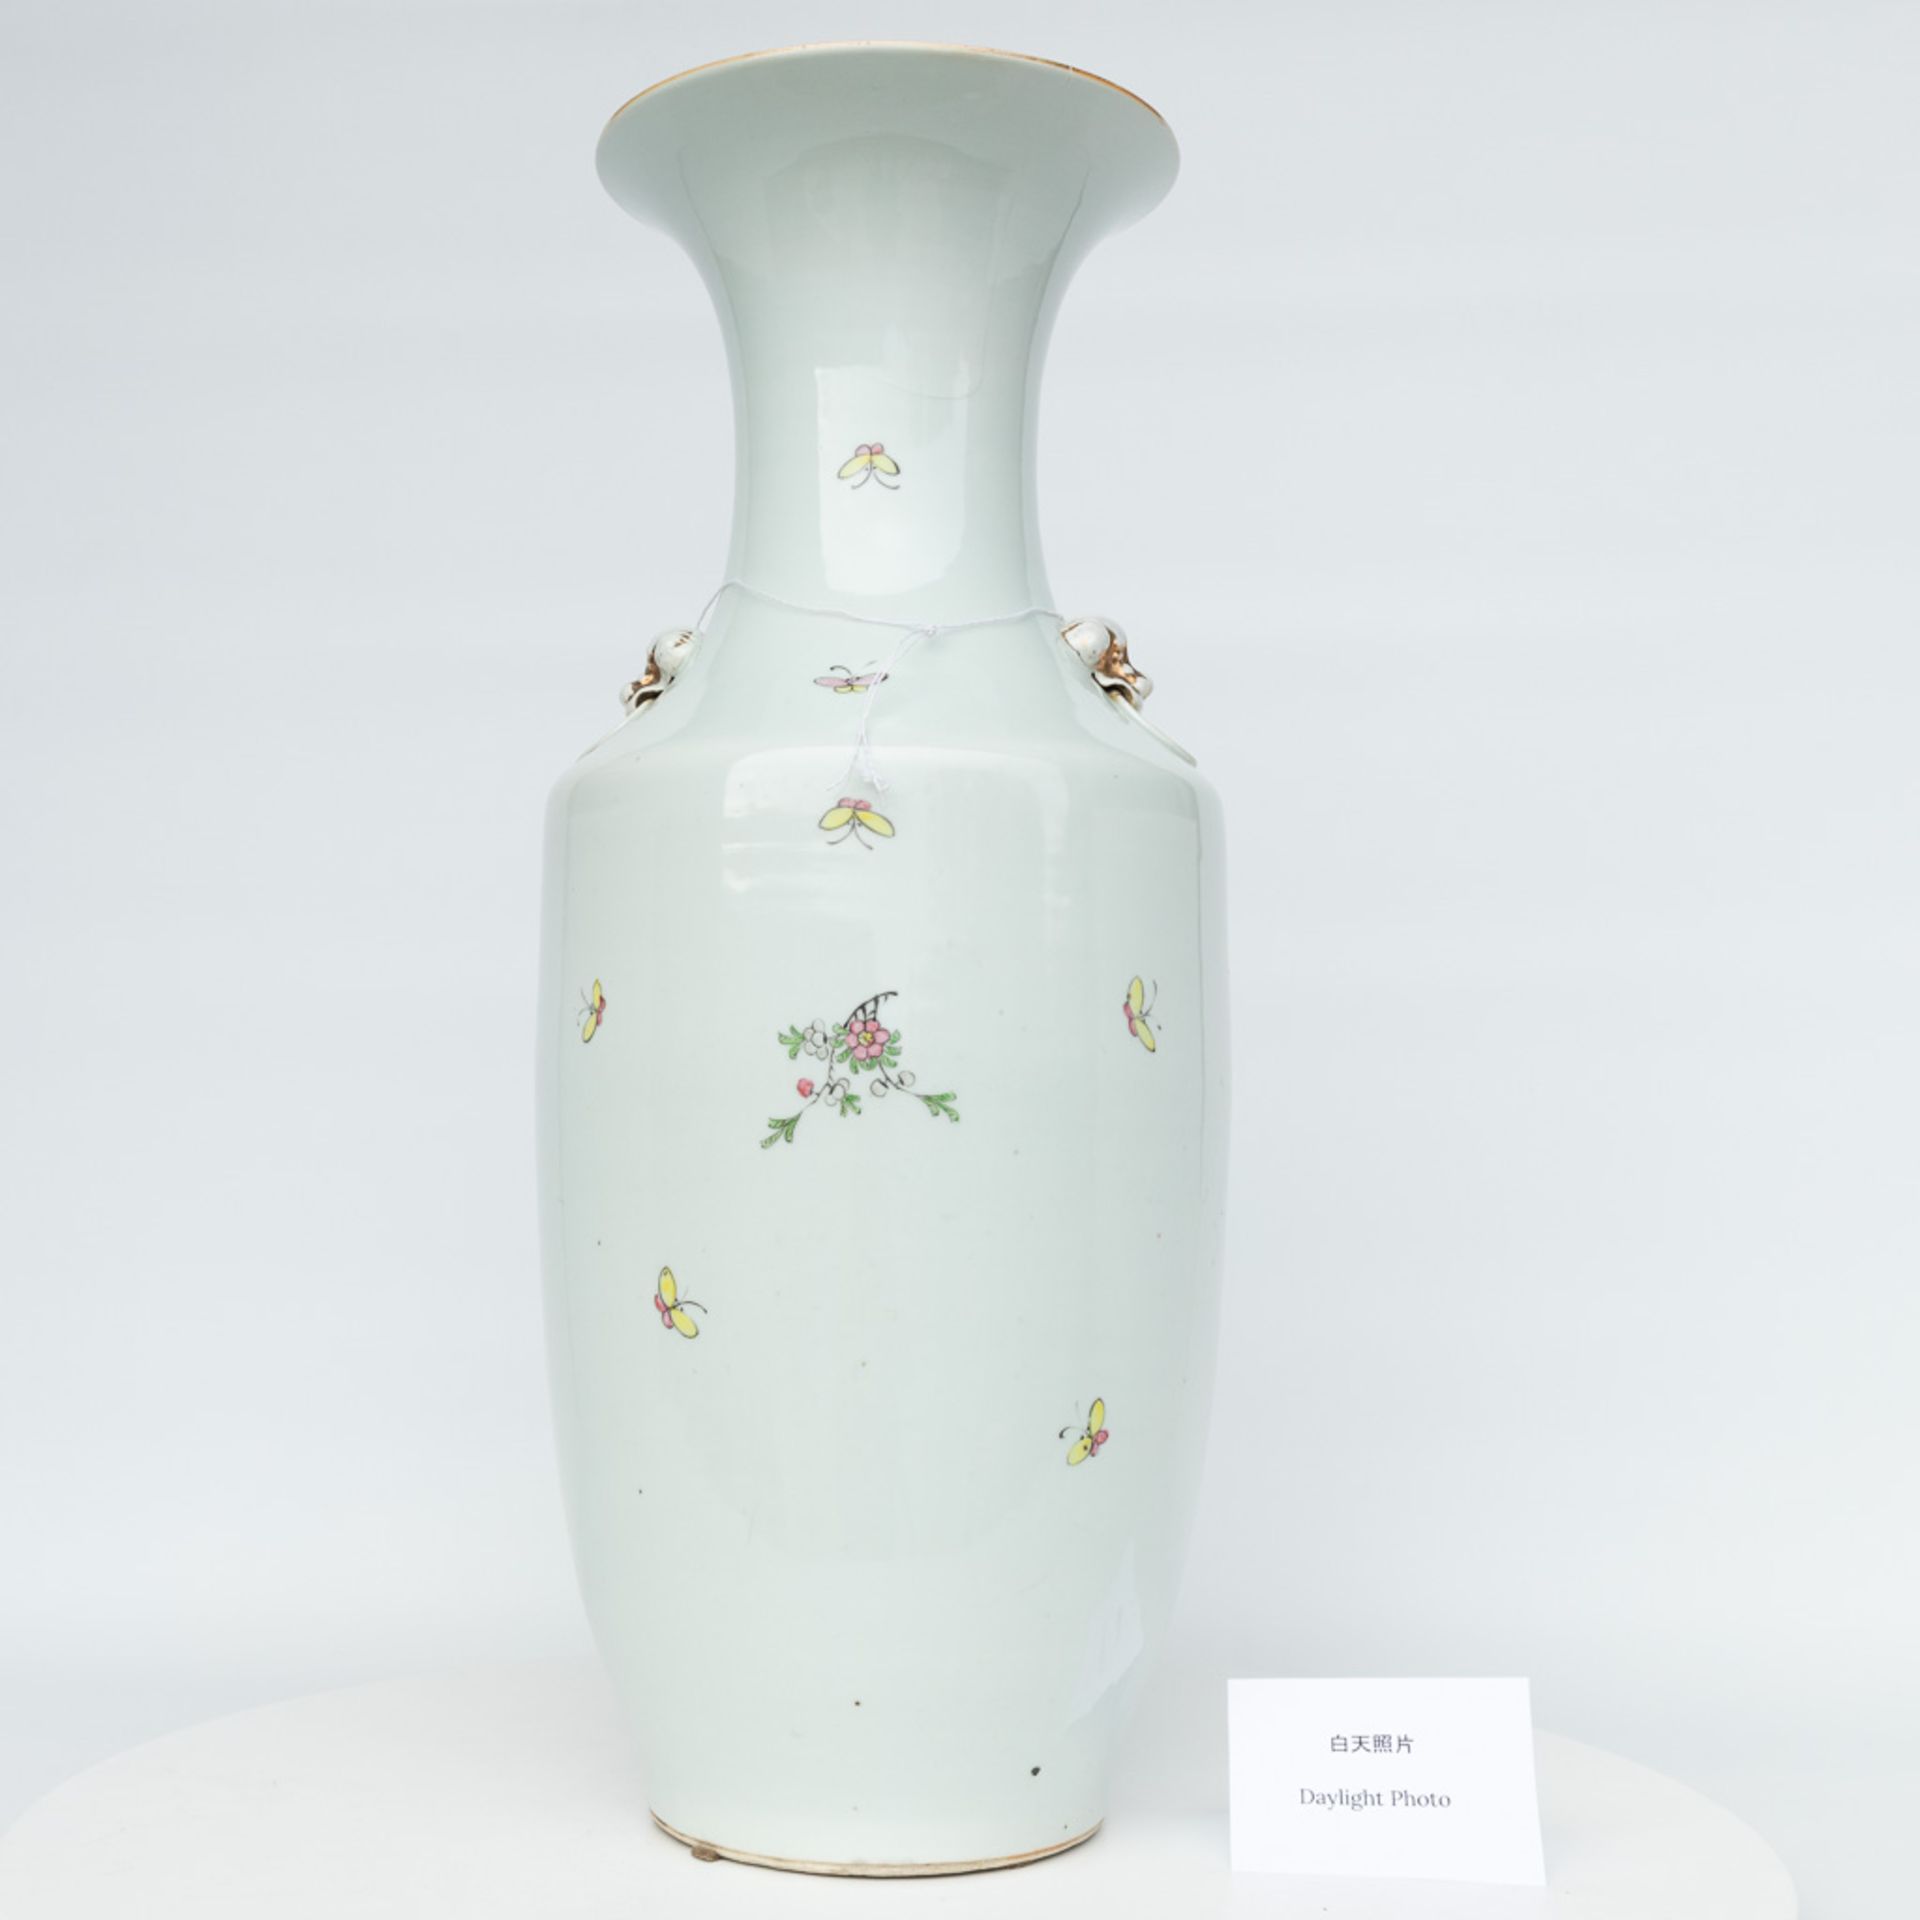 A vase made of Chinese porcelain and decorated with flowers and birds. - Image 14 of 16